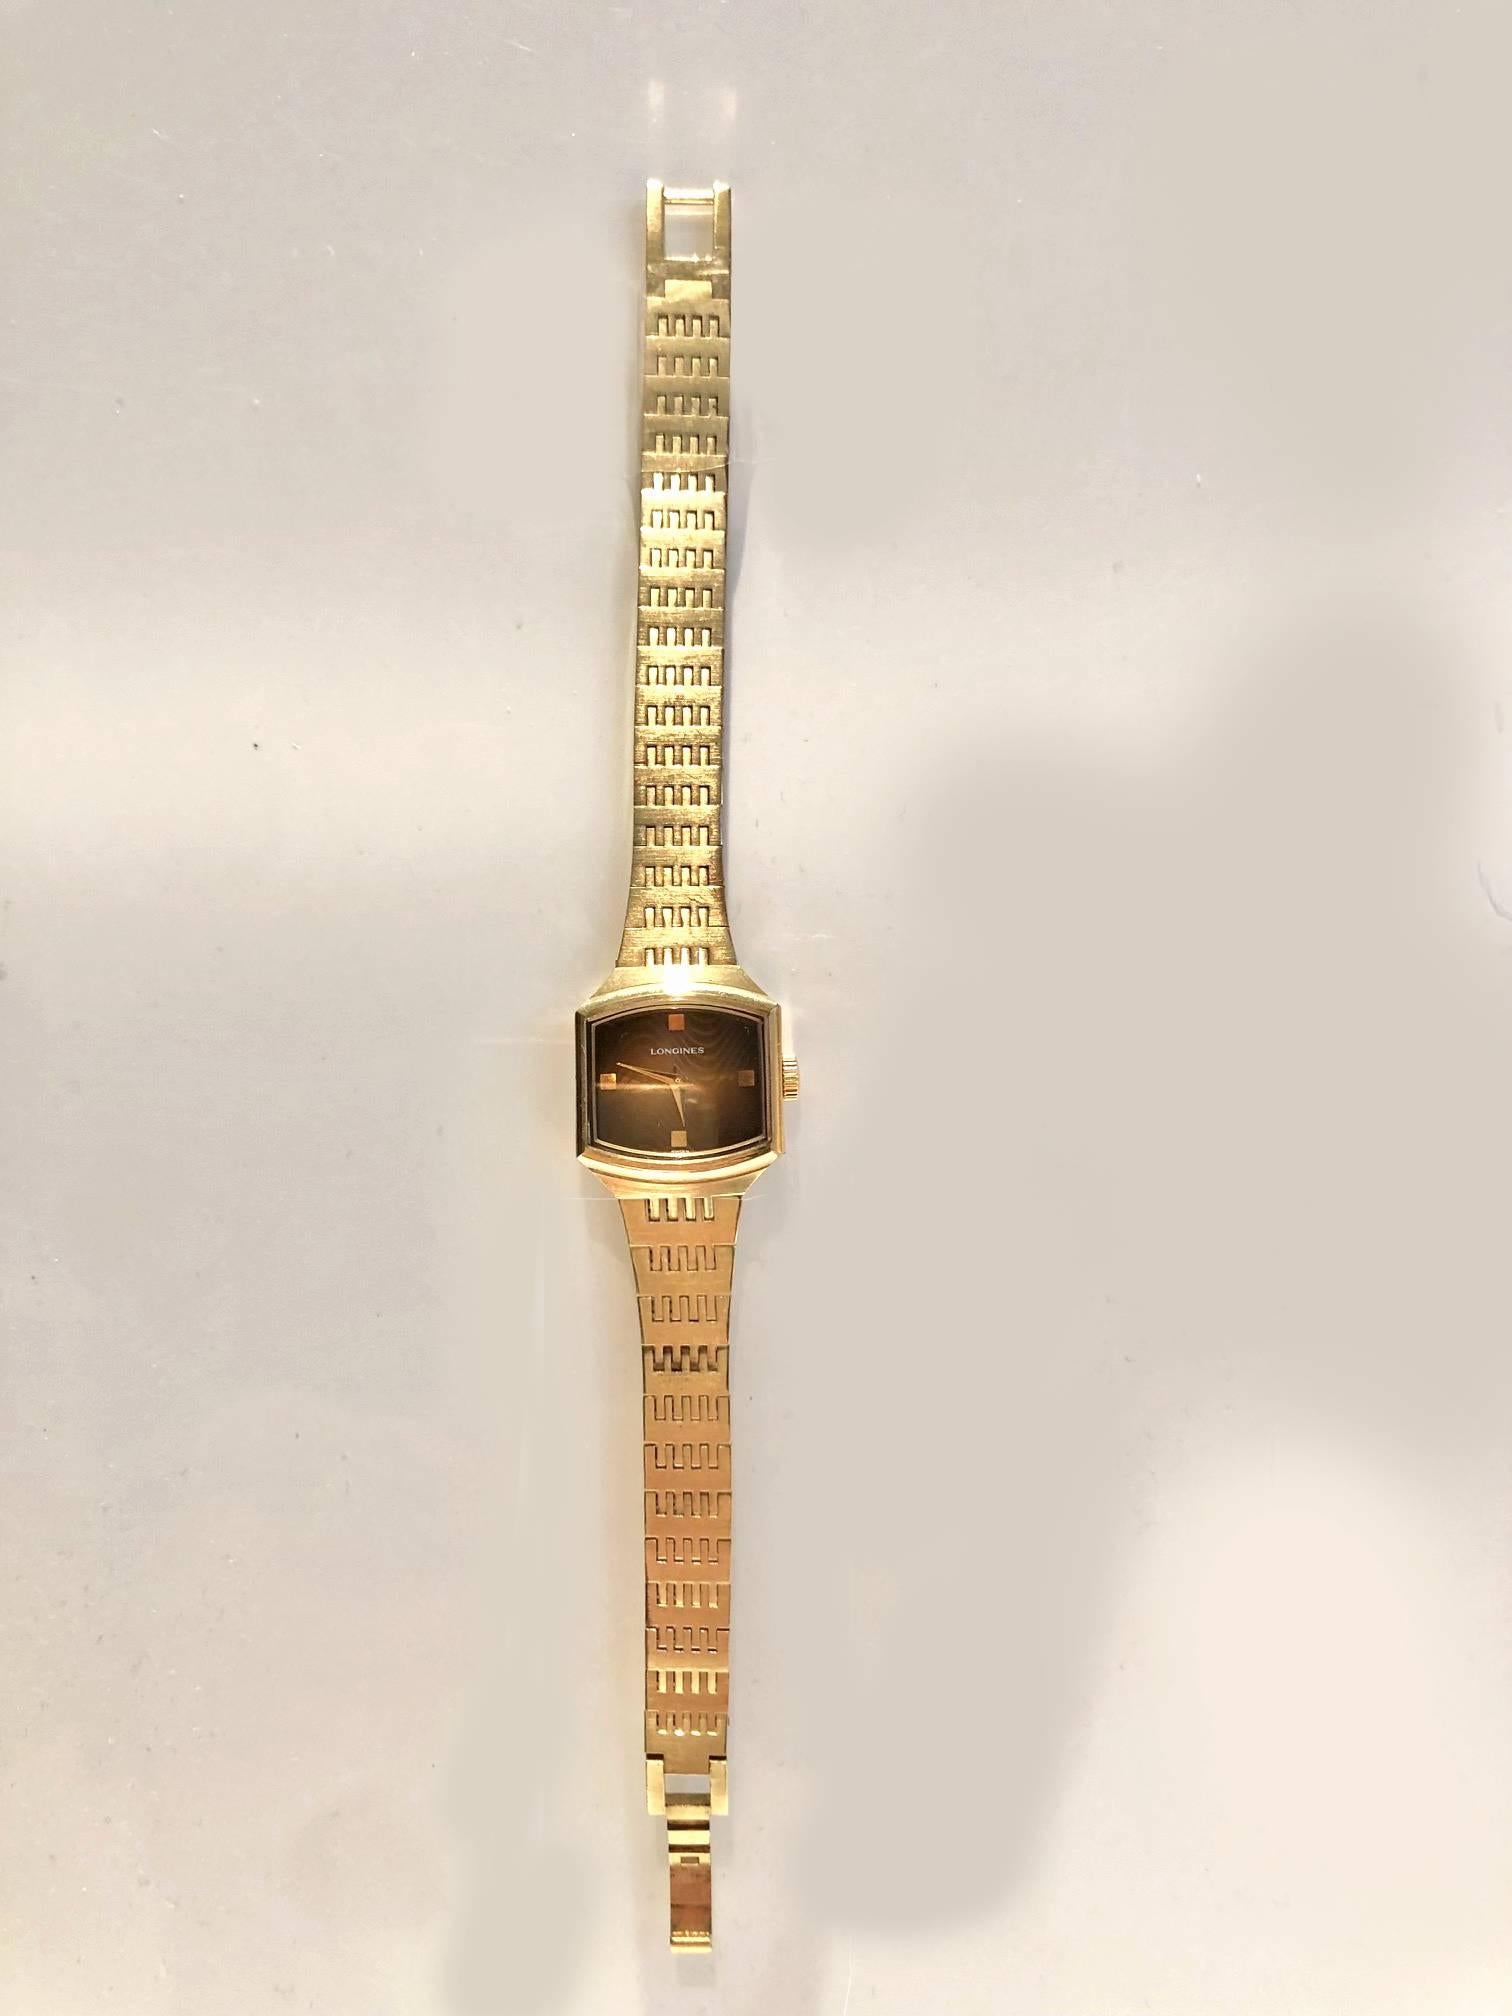 Longines Gold steel cal 15L 17 jewel wristwatch, mechanical movement, wave pattern on gold face,

Condition: 1970s, good working order, some colour fade on steel as expected, overall very good condition

Measurements: 
- face 2 x 1.5 cm 
- length: